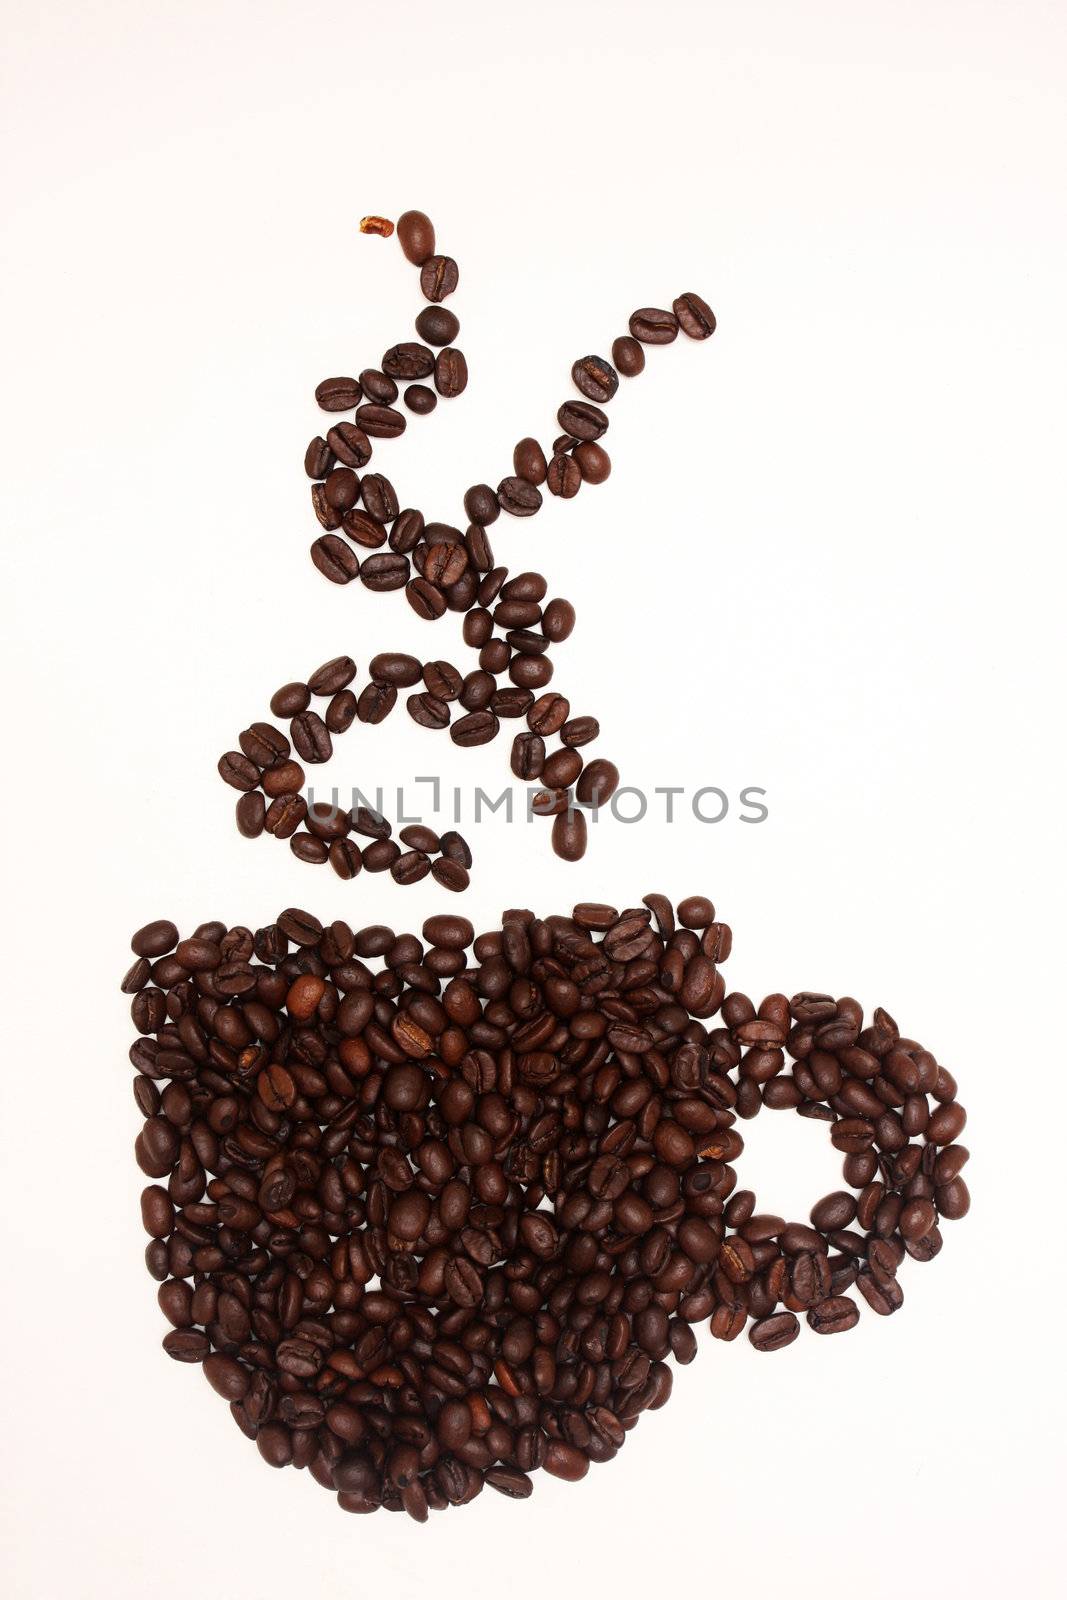 coffeebeans arranged in the shape of a cup, isolated on white